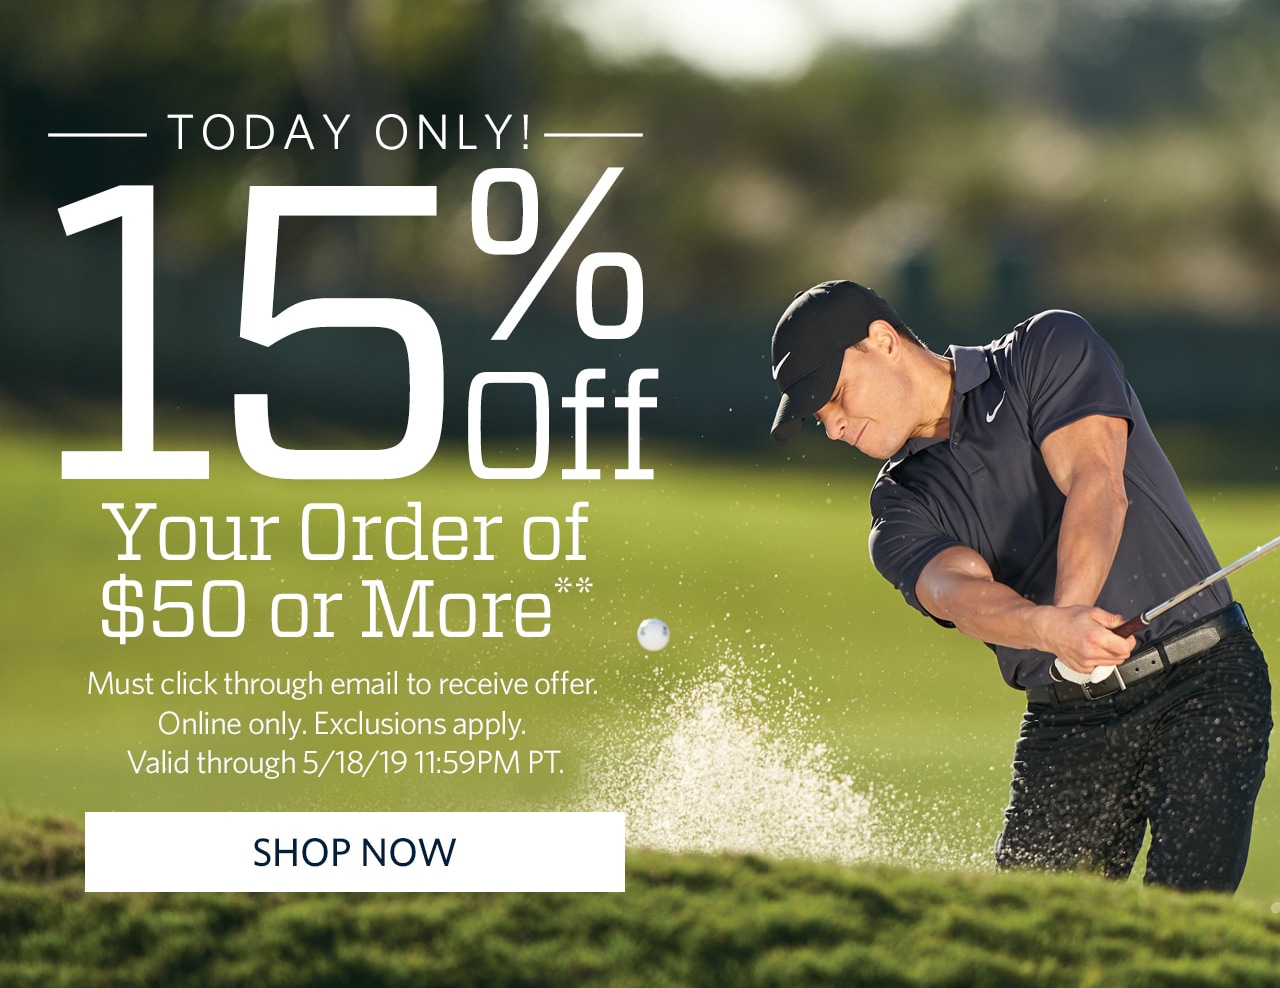 15% Off Your Order of $50 or More** Must click through email to receive offer. Online only. Exclusions apply. Valid through 5/18/19 11:59PM PT. | If after 5/18/19, 11:59pm, Sorry! You missed this promotion, but you can still shop this week's deals. | SHOP NOW